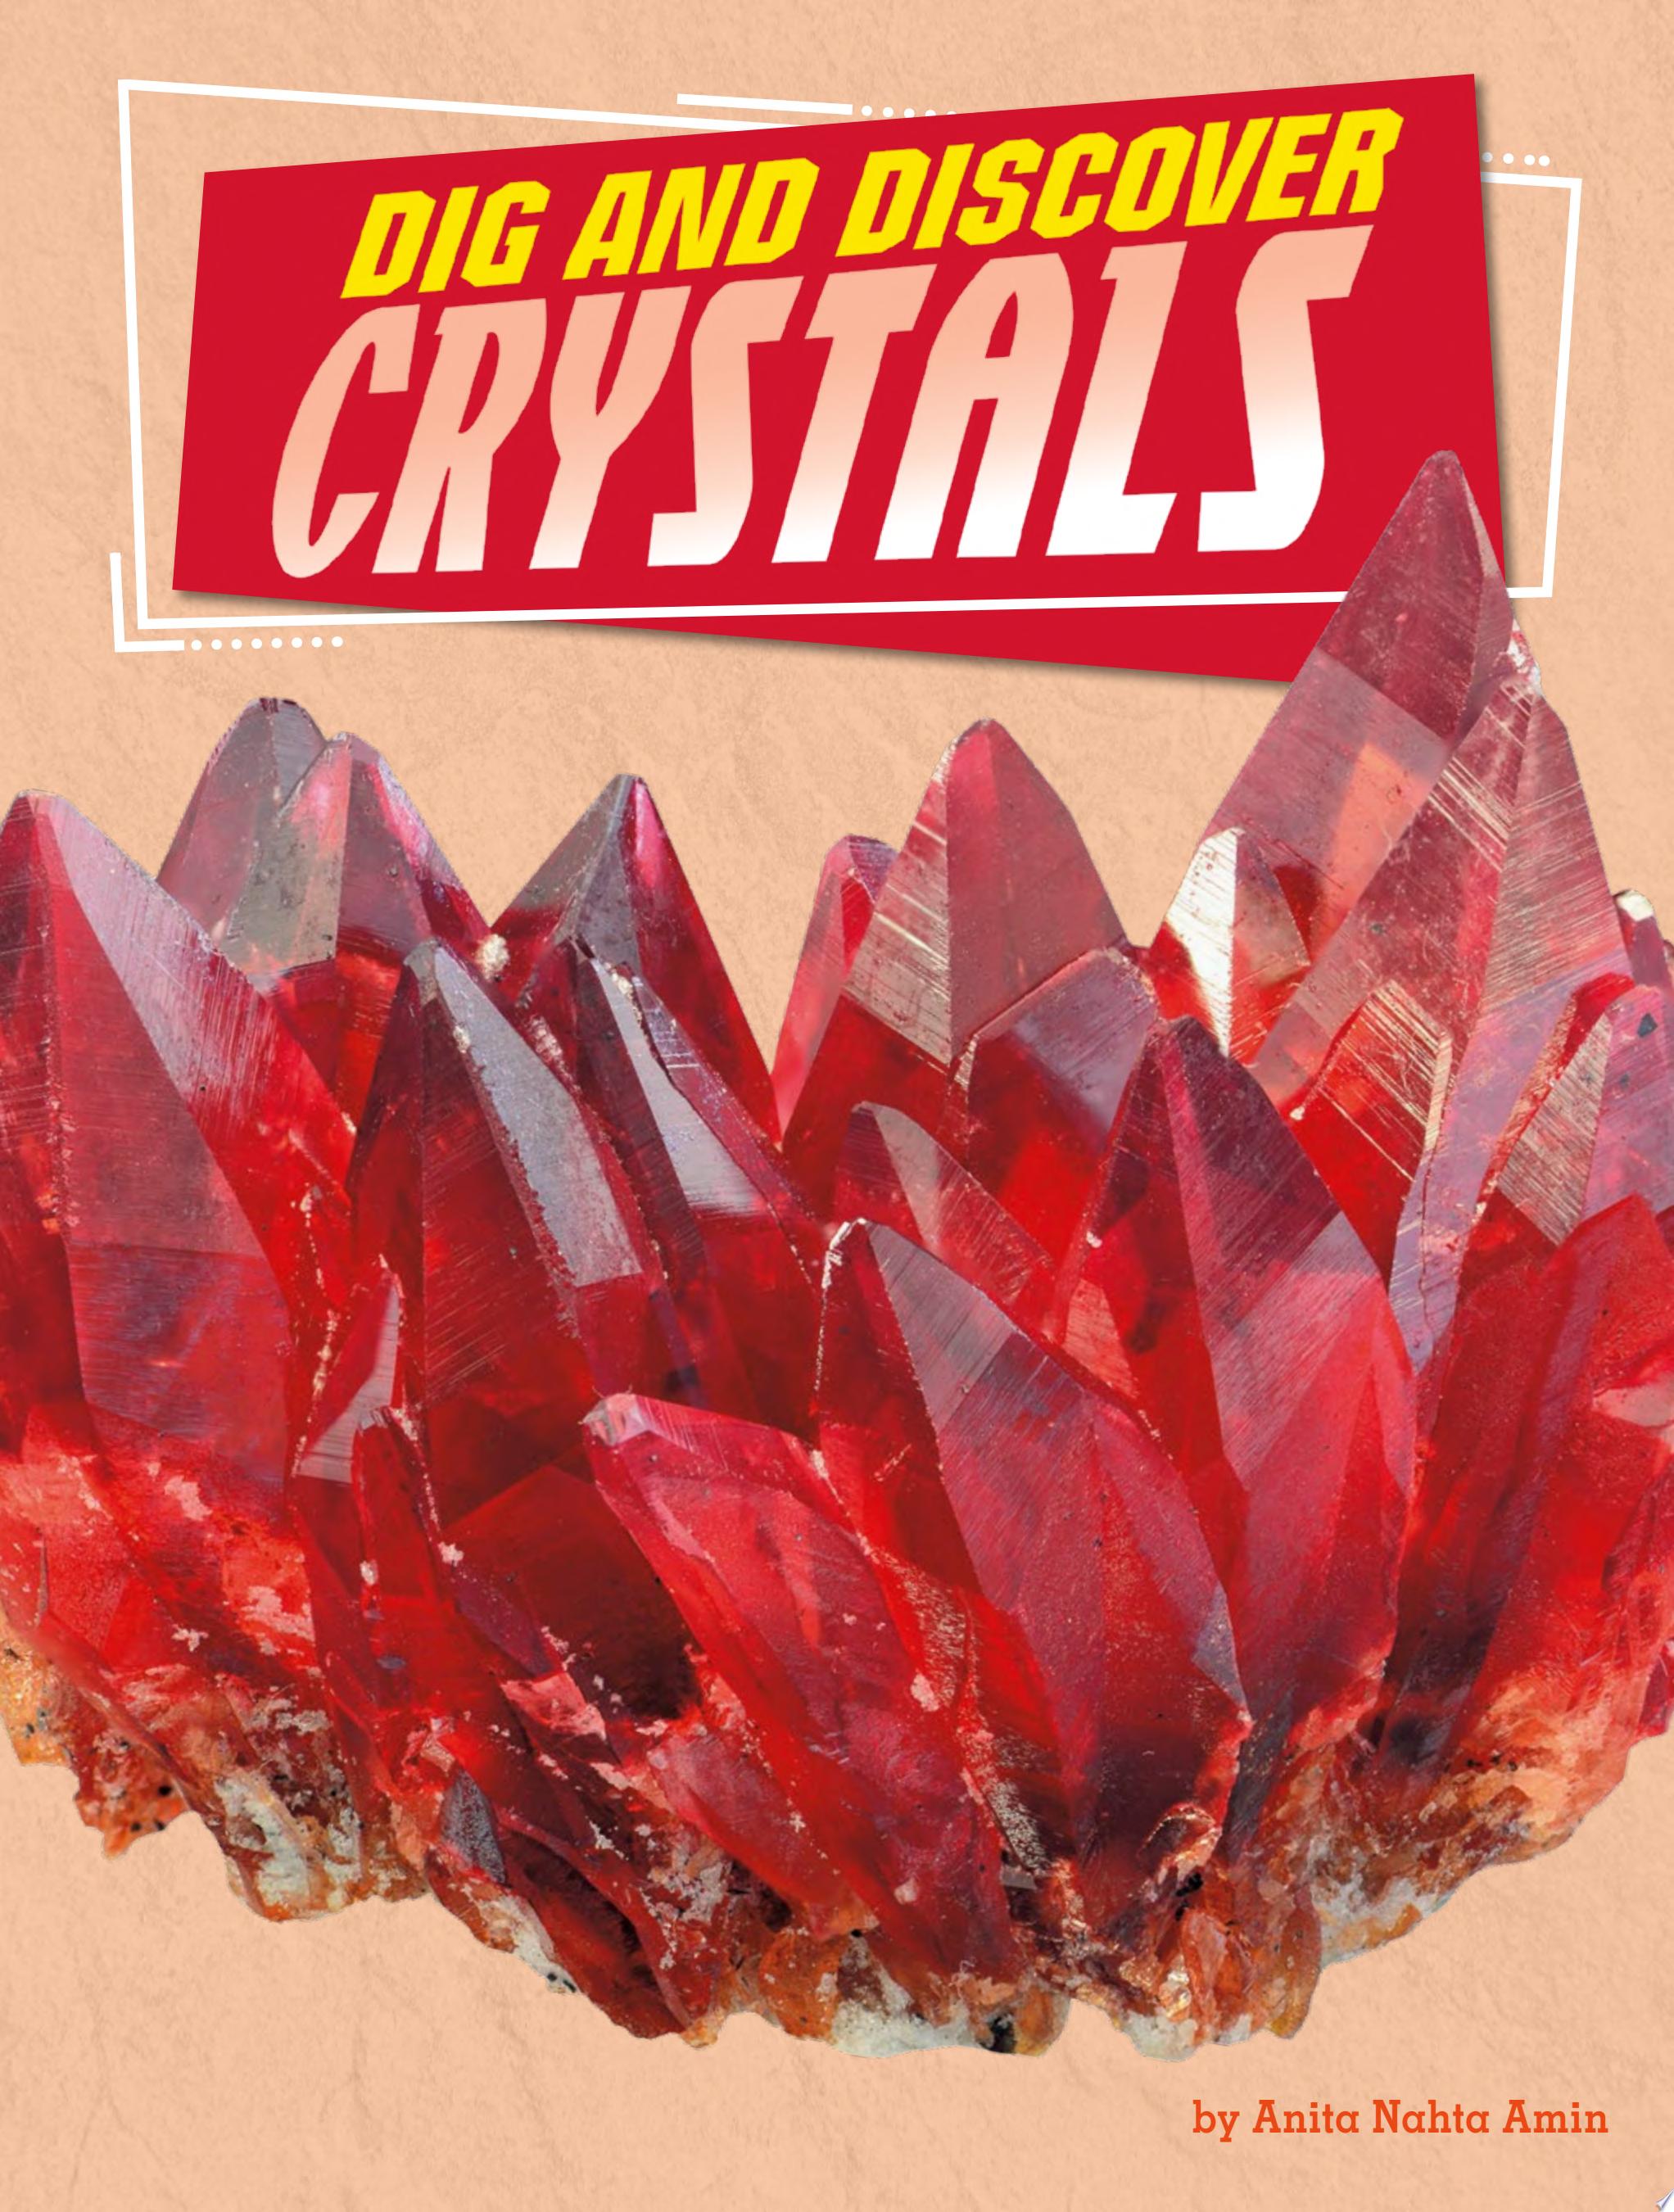 Image for "Dig and Discover Crystals"